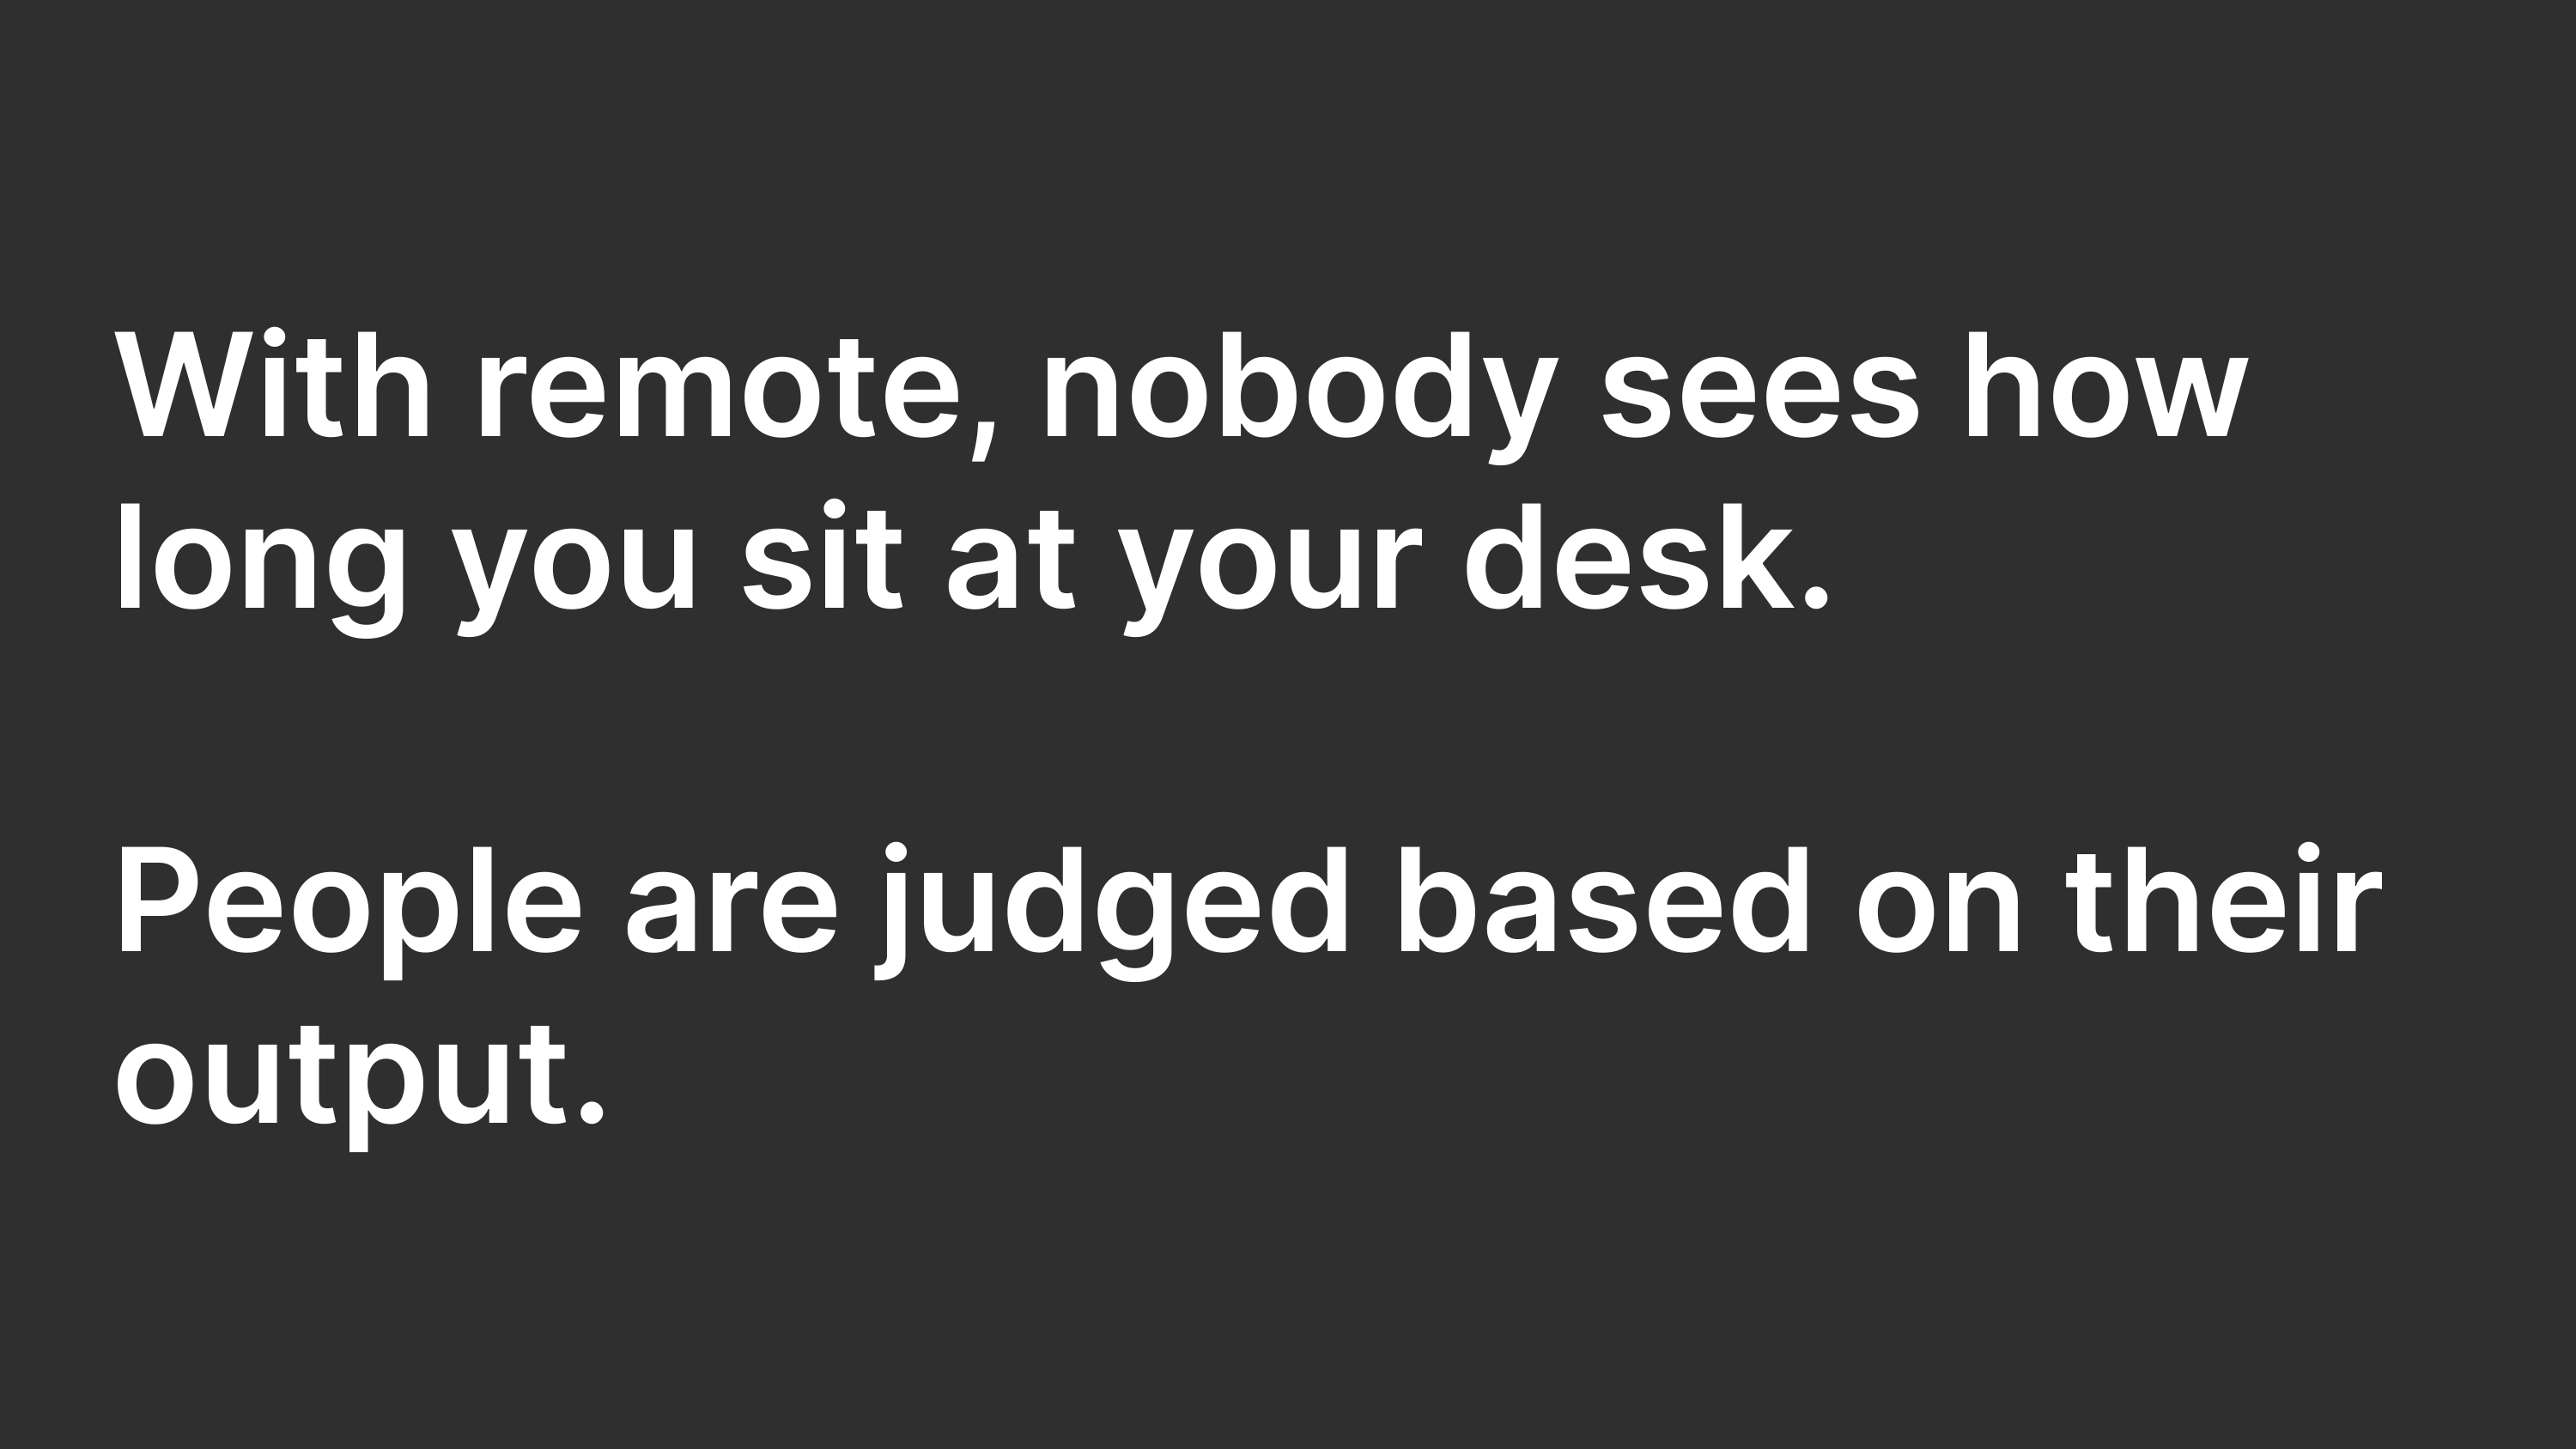 With remote, nobody sees how long you sit at your desk. People are judged based on their output.